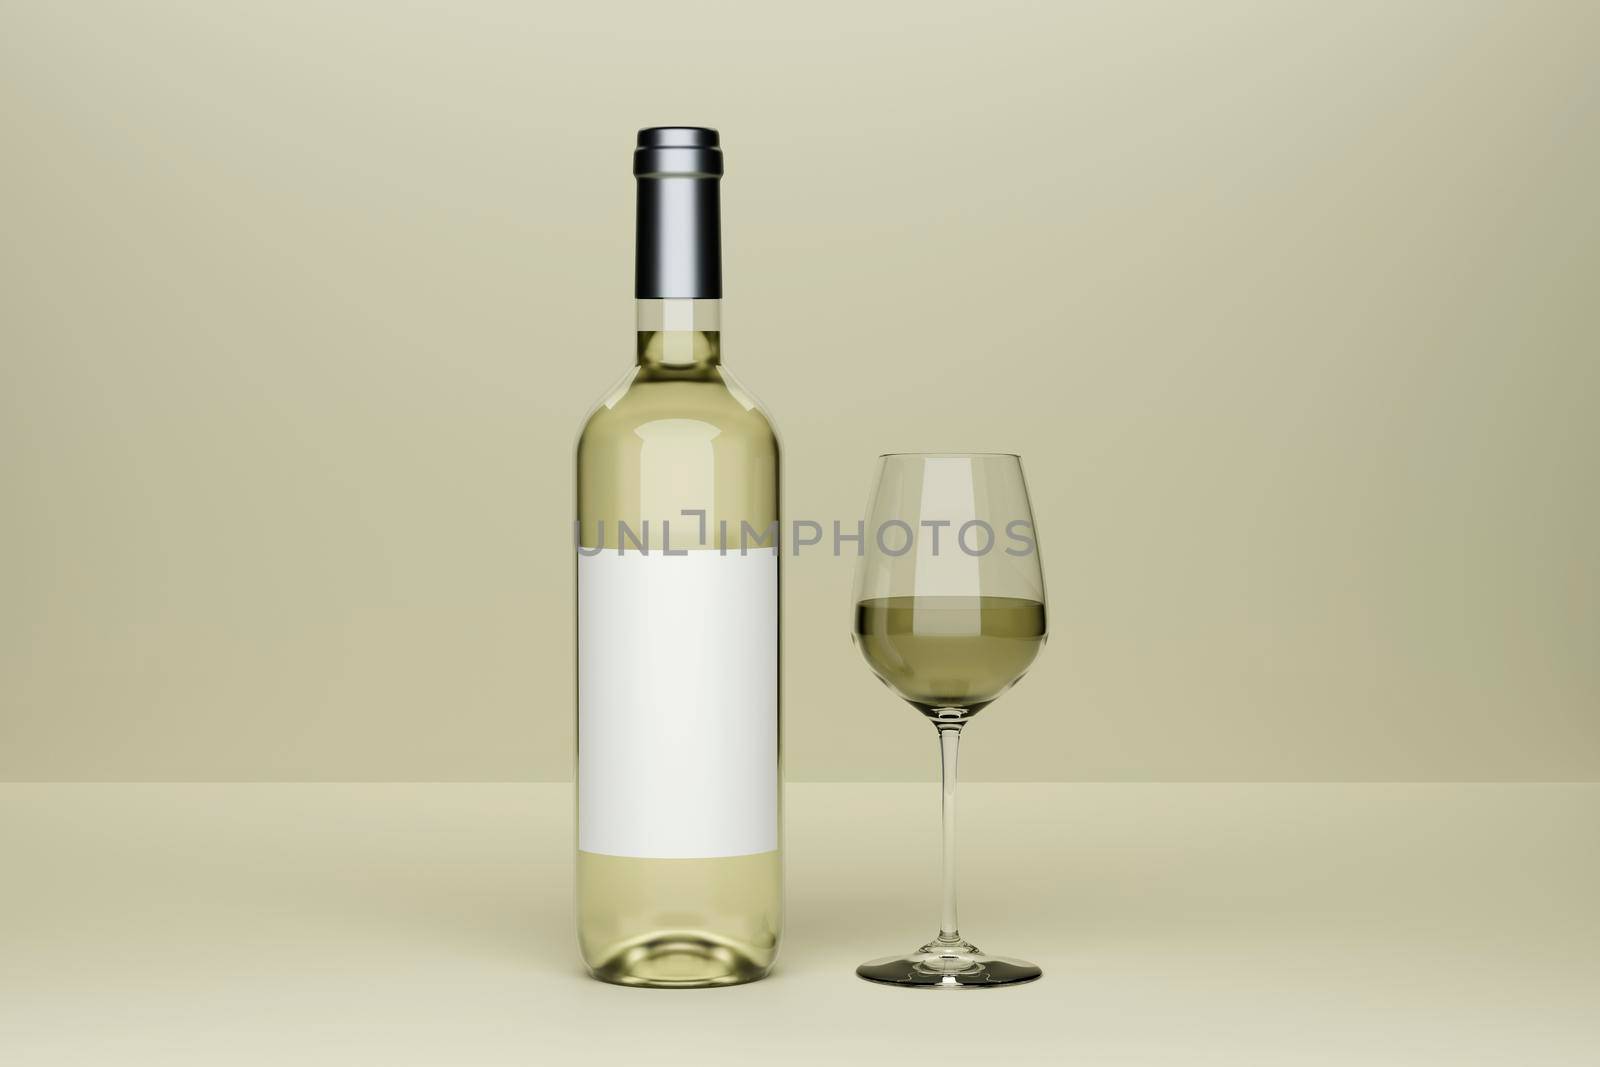 Bottle of white wine with label and a glass goblet in photo-realistic style on a clear green background. 3d realism render